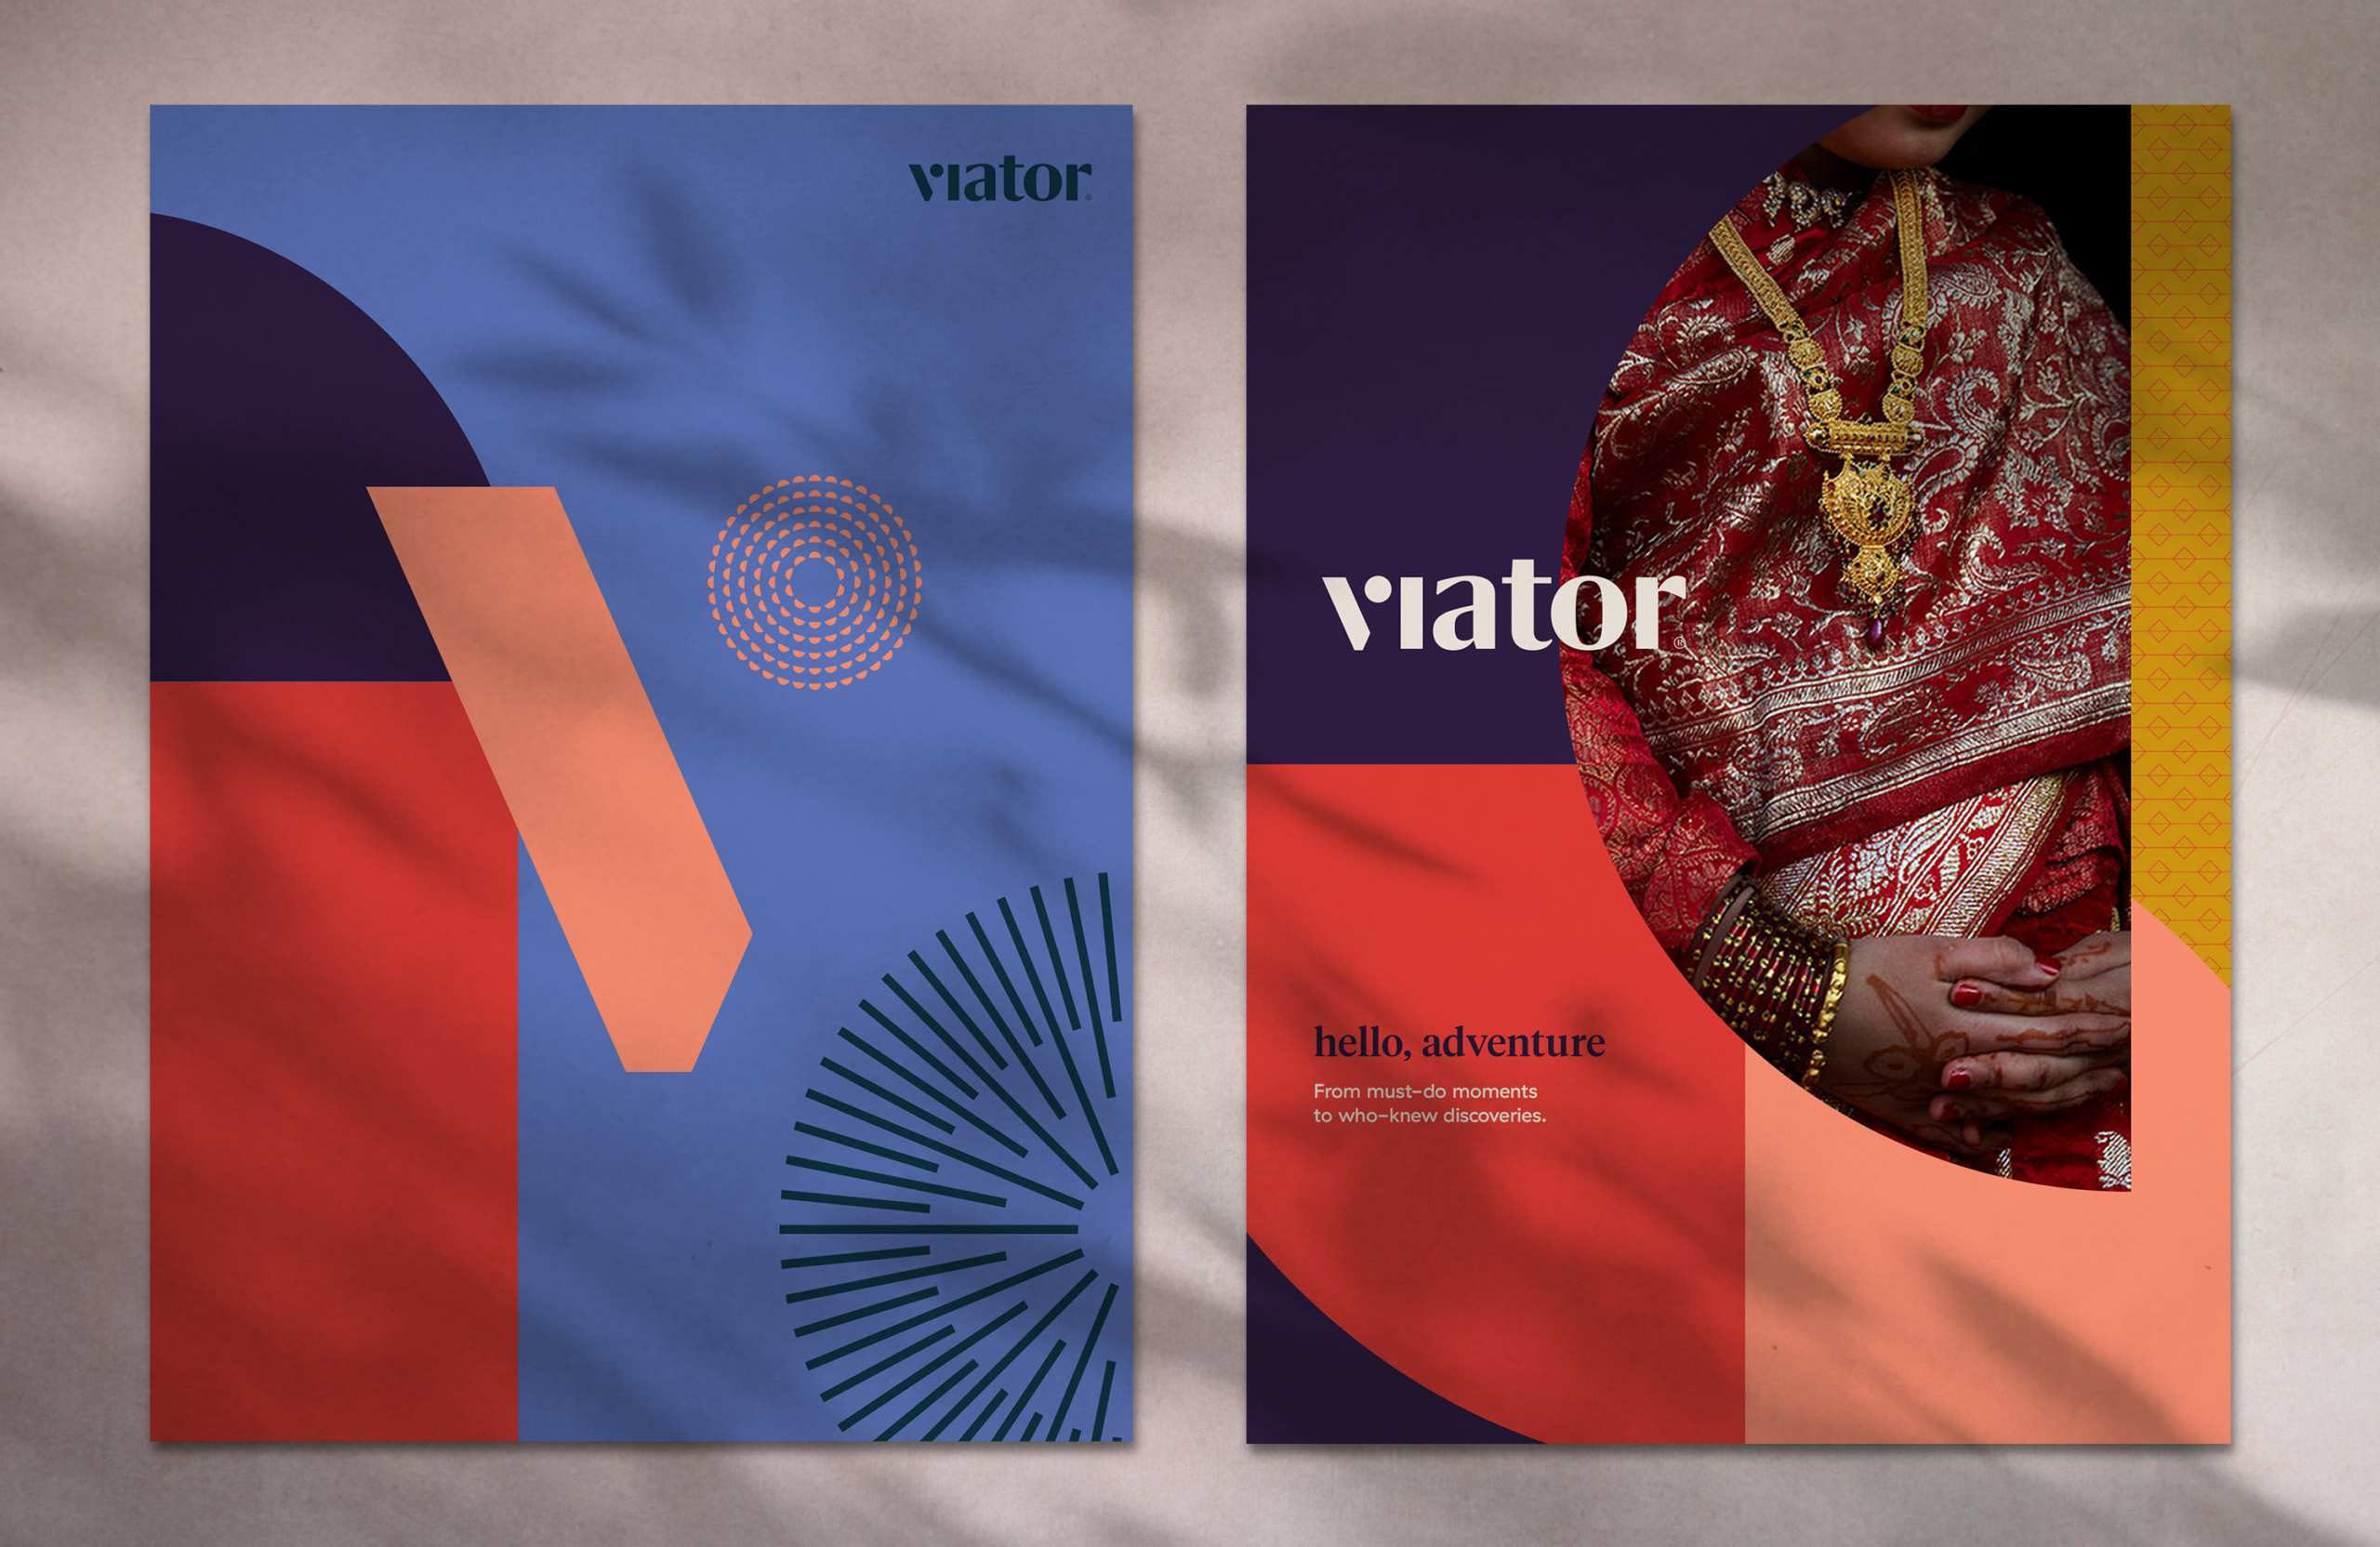 Colorful poster advertisements for Viator are displayed against a concrete wall. Featured images among the poster set: a person in a deep red sari, ornate gold necklace and stack of wrist bangles, paired with the brand’s new tagline “Hello, adventure.” Also included: boats on a gloomy lake in Phuket, and rolling golden hills of Tuscany.